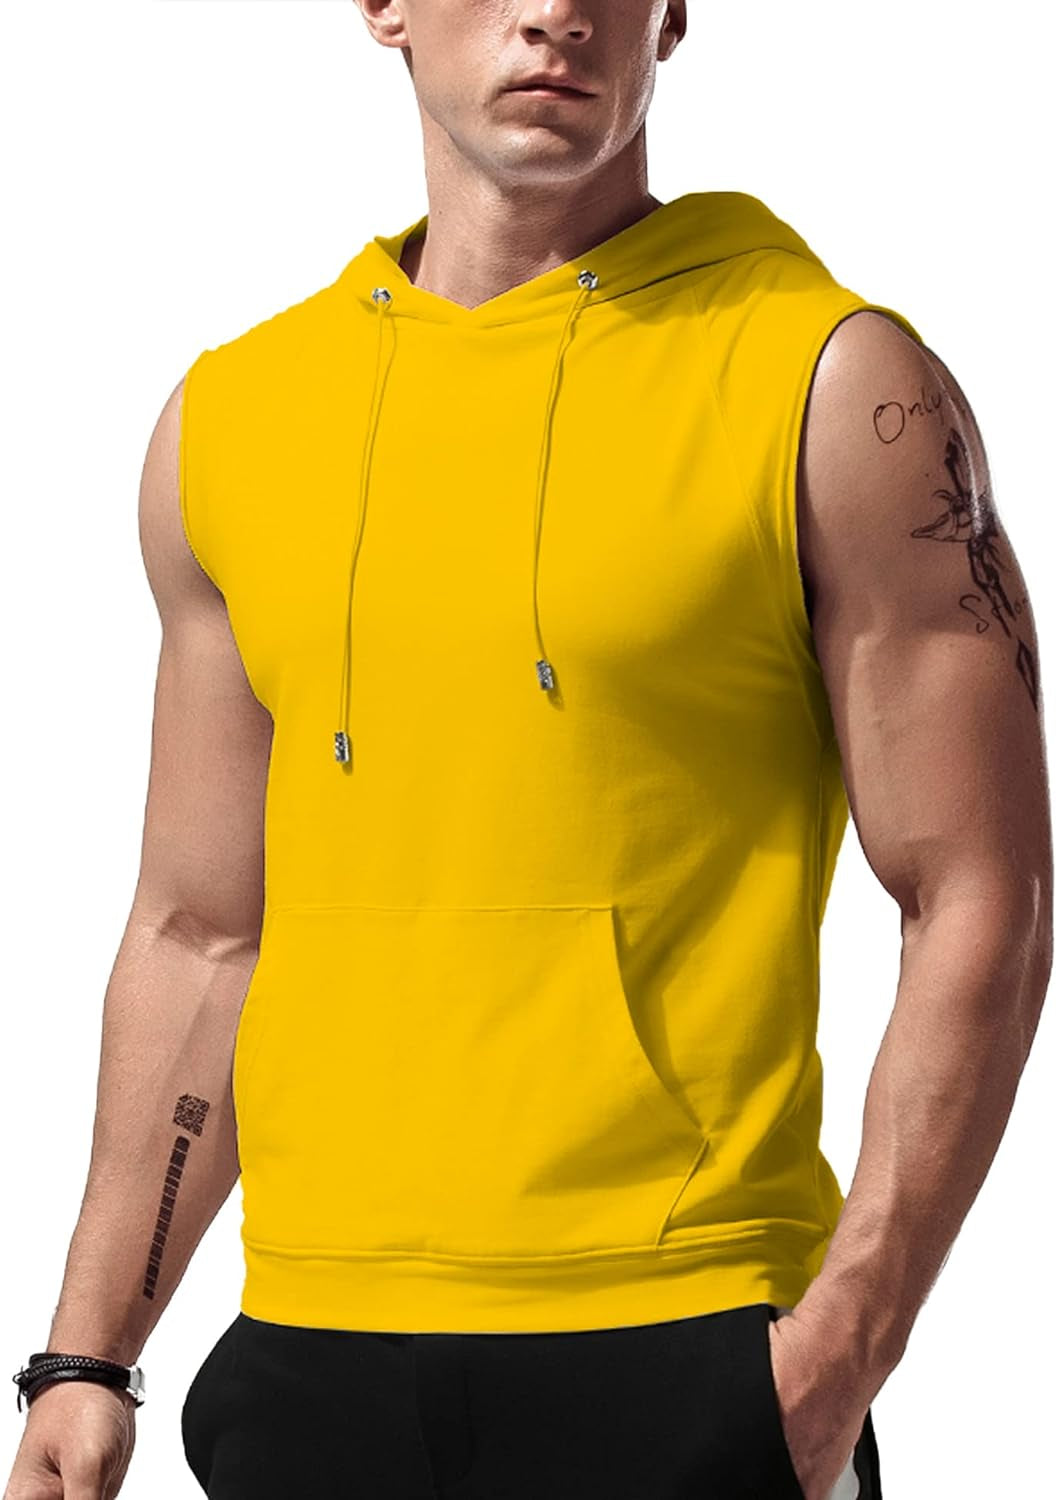 Sleeveless Hoodie Men Workout Hooded Tank Top Gym Muscle Shirts with Pocket